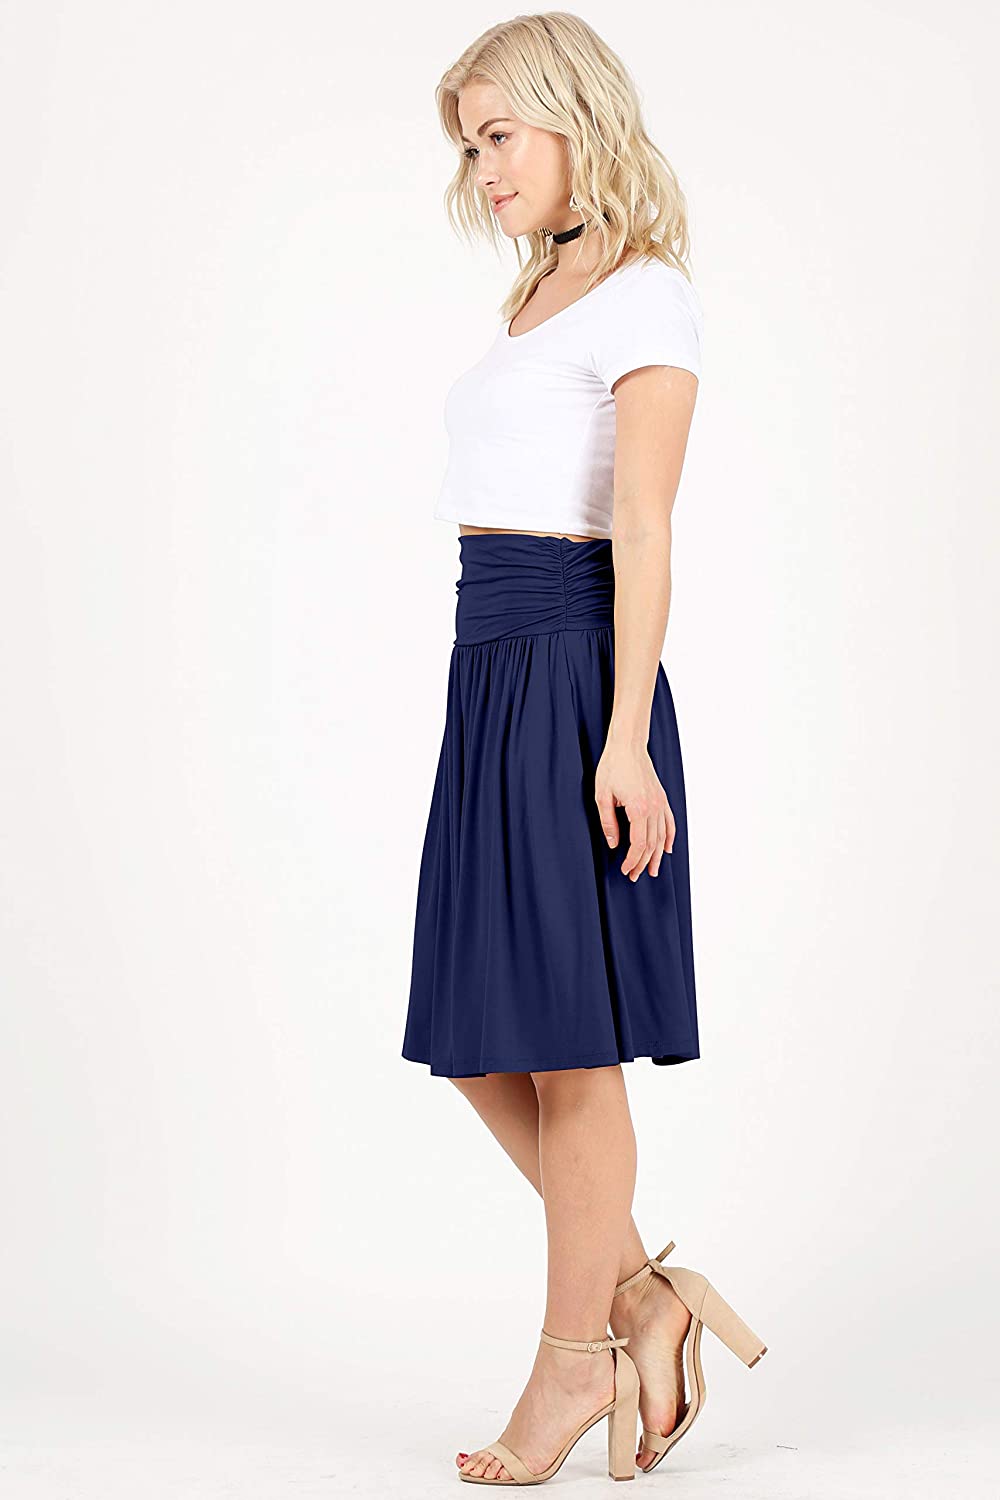 Grey Skirts for Women Reg and Plus Size Skirts a Line Knee, Blue, Size ...